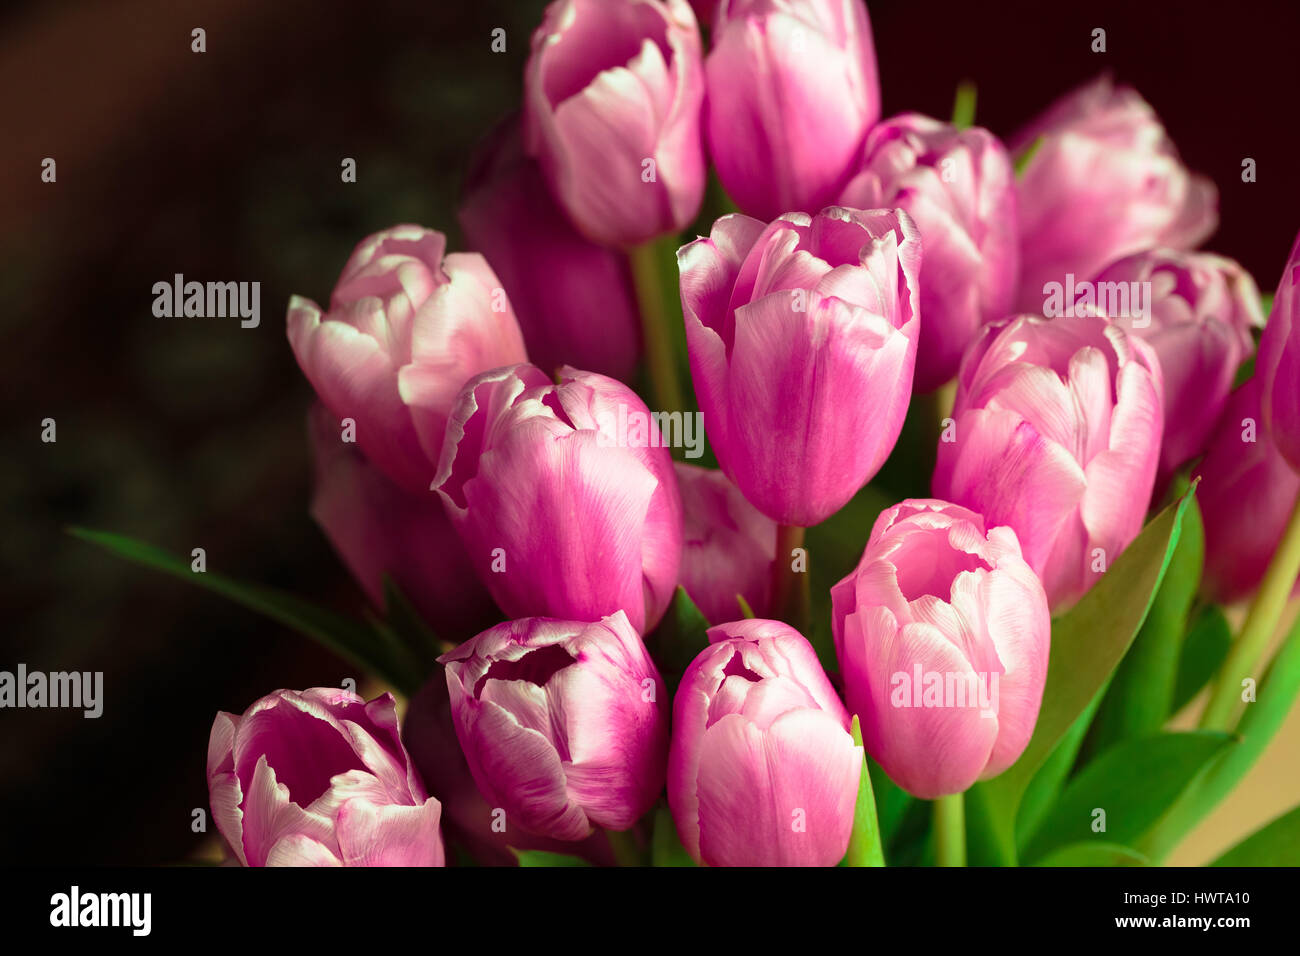 Bouquet of pink tulips close up photo. Stock Photo